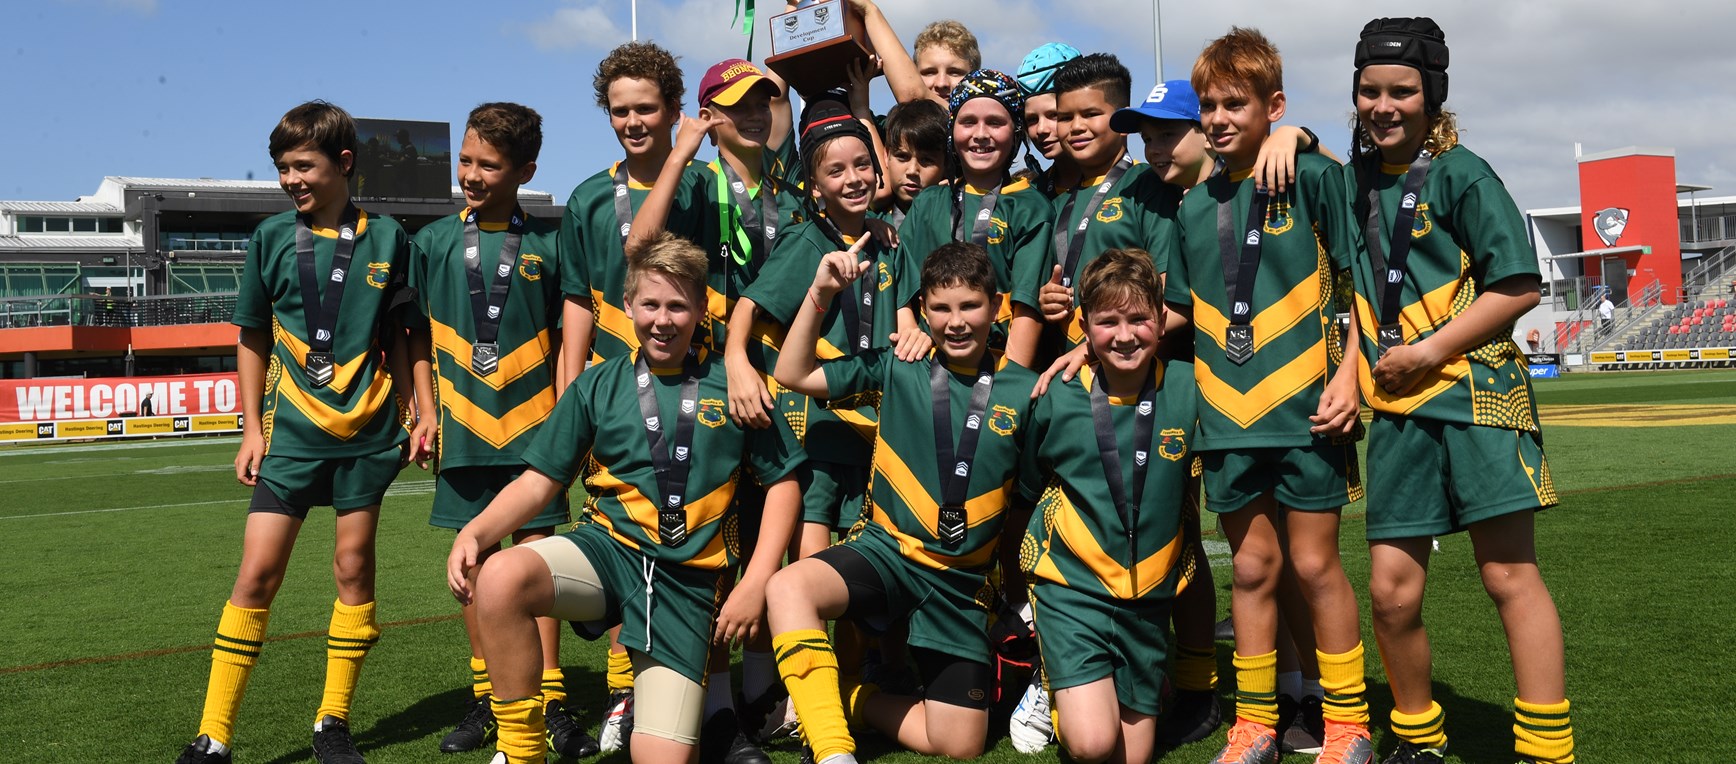 In pictures: NRL Development Cup - Currumbin State School beat Frenchville